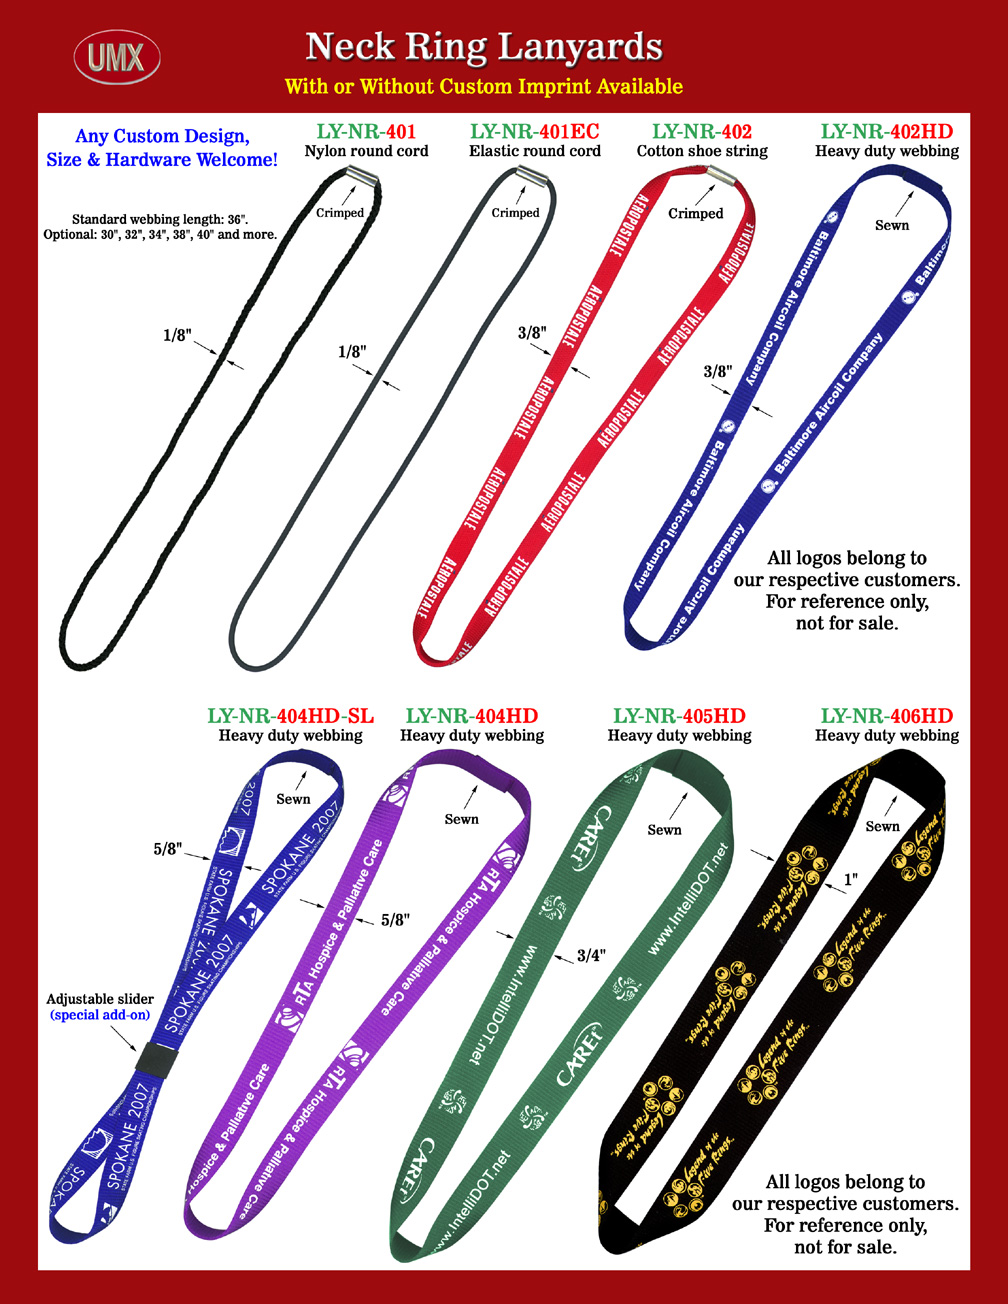 Not only used for name badges, IDs or ID card holders, neck rings, neck bands or neck strap lanyards are designed for a variety of applications, like carrying keys, tools, small meters, camera, cell phones and more.